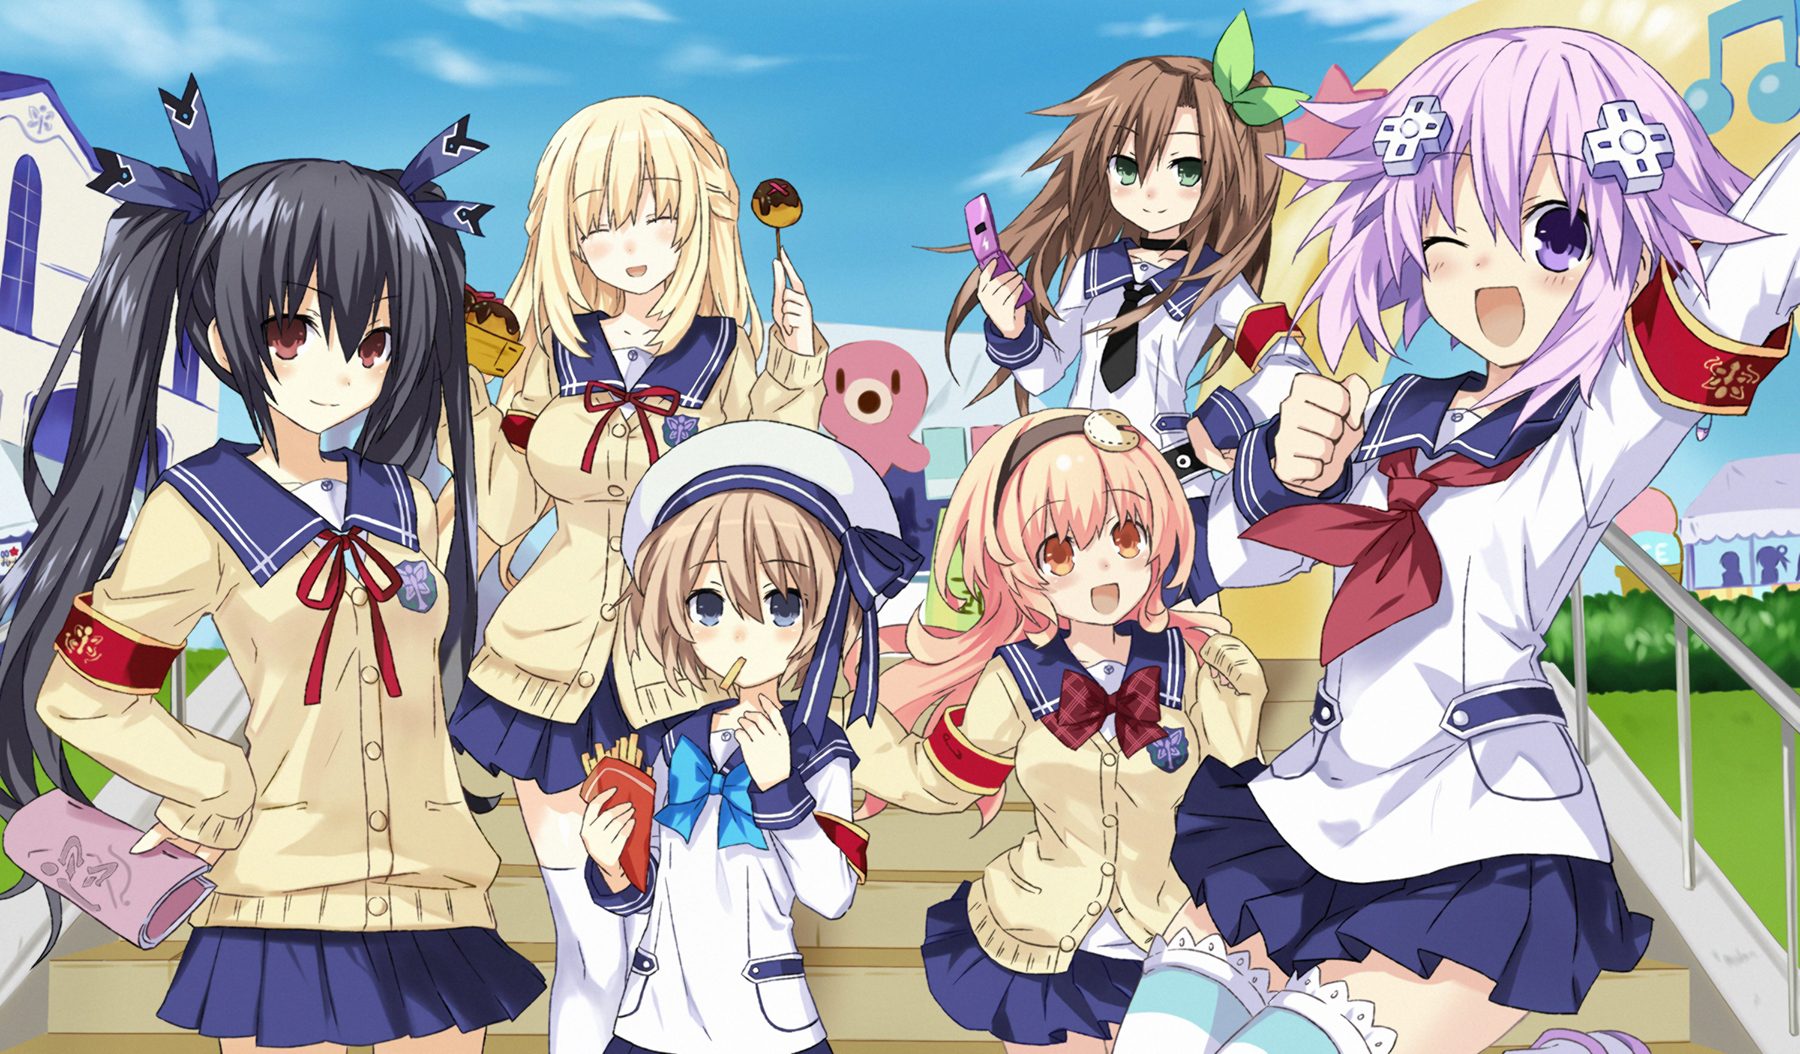 Blanc compa if neptune noire and others neptune series drawn by flankoi jiqingjie2008 1f076129bd1251121f71e2aff8bc9b06